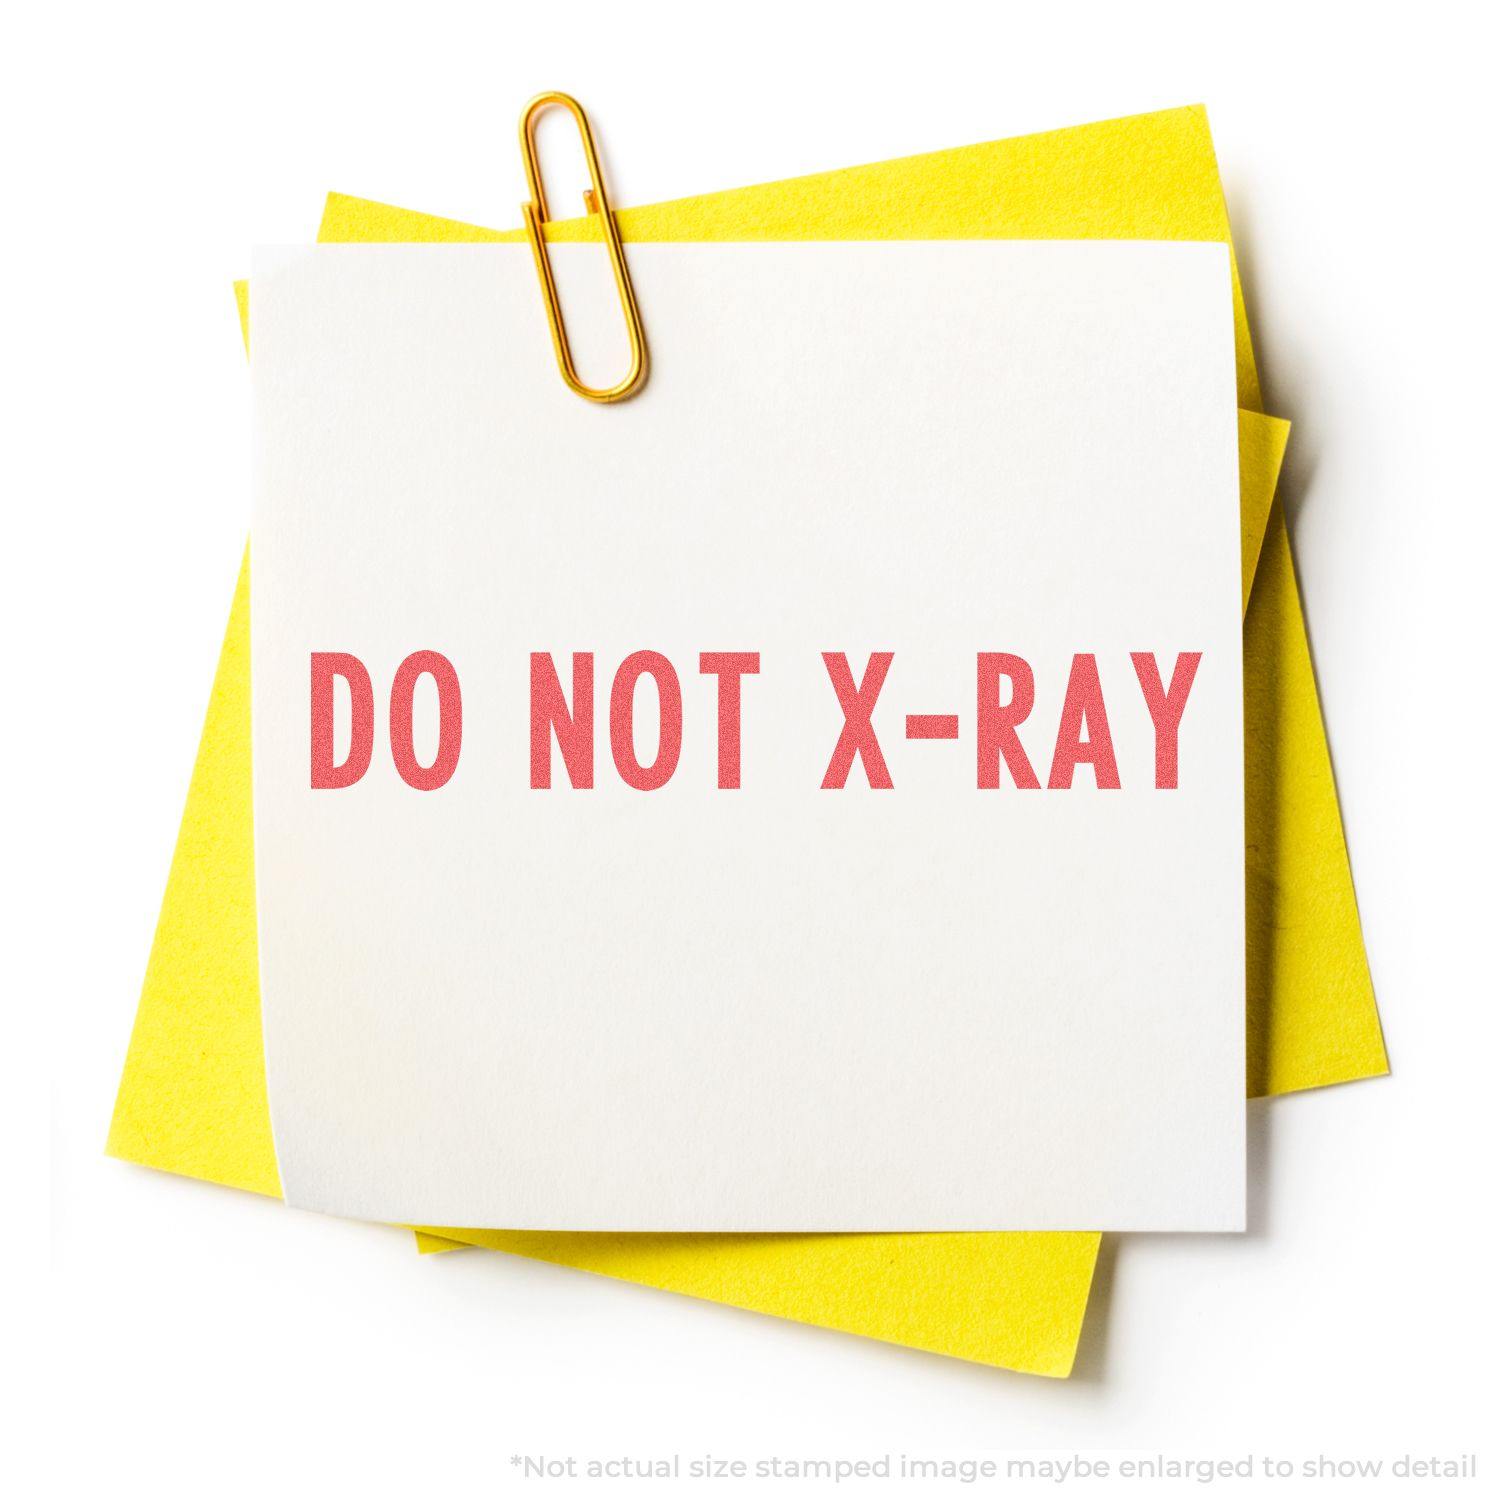 In Use Photo of Do Not X-Ray Xstamper Stamp